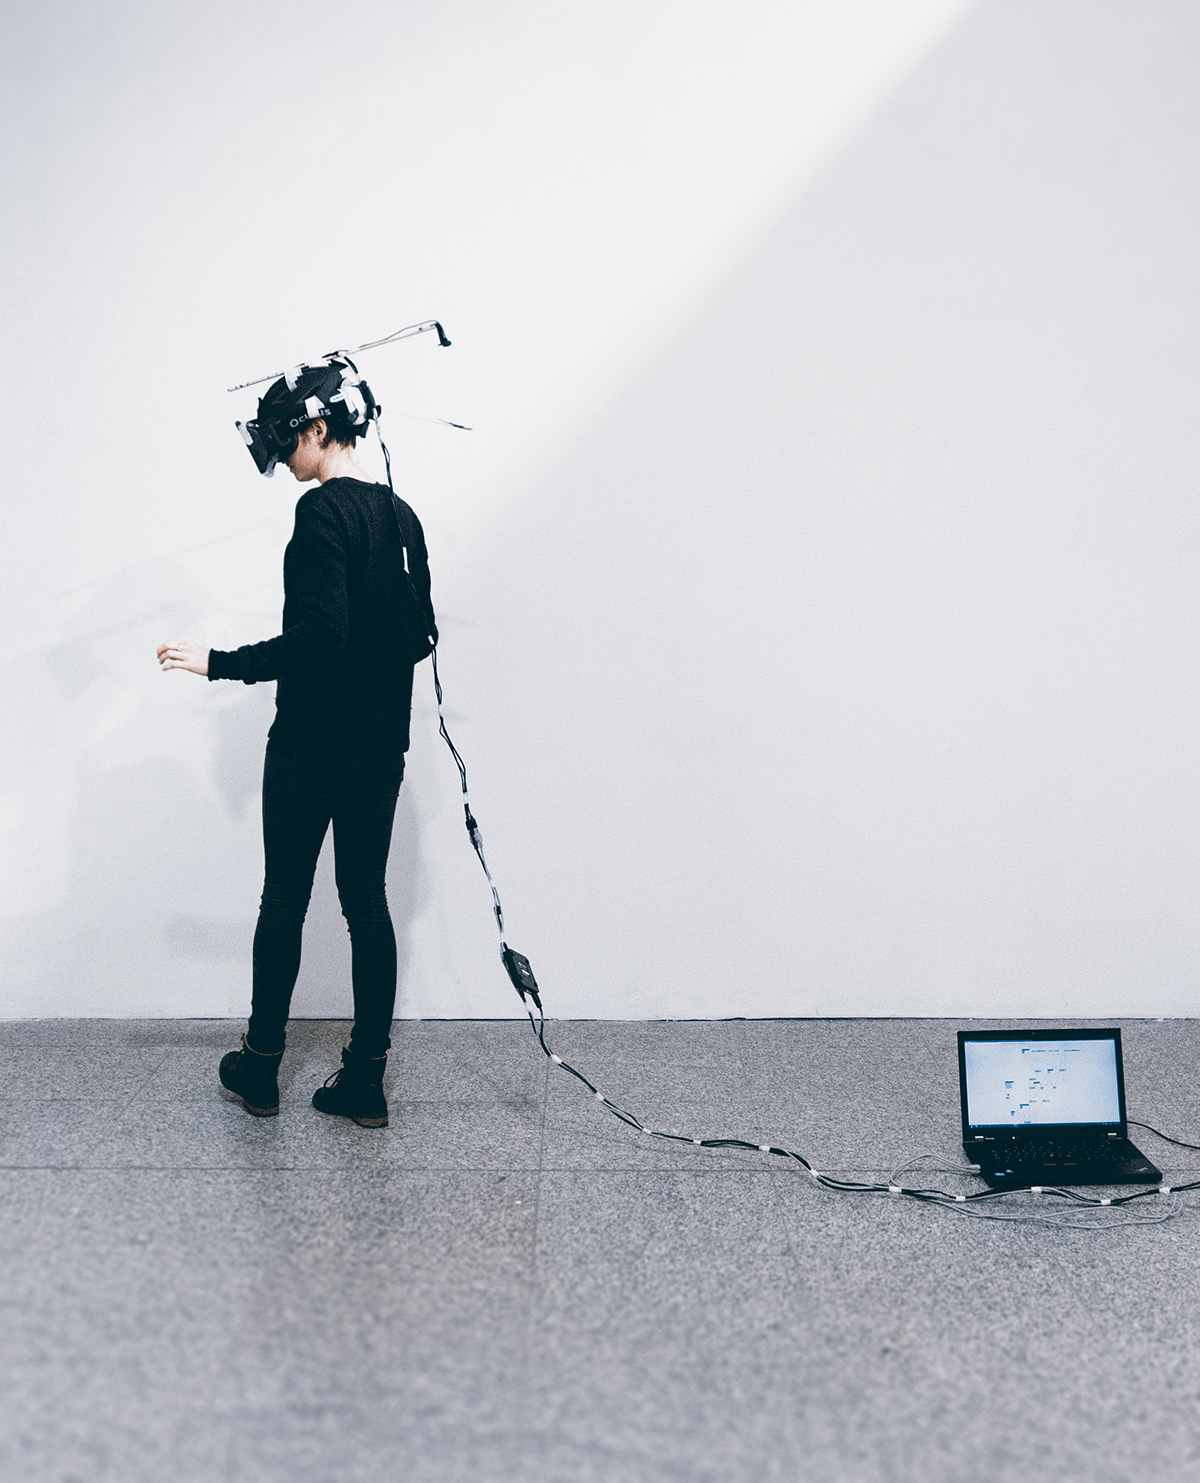 shadowy existence Schattendasein augmented reality vvvv Oculus Rift